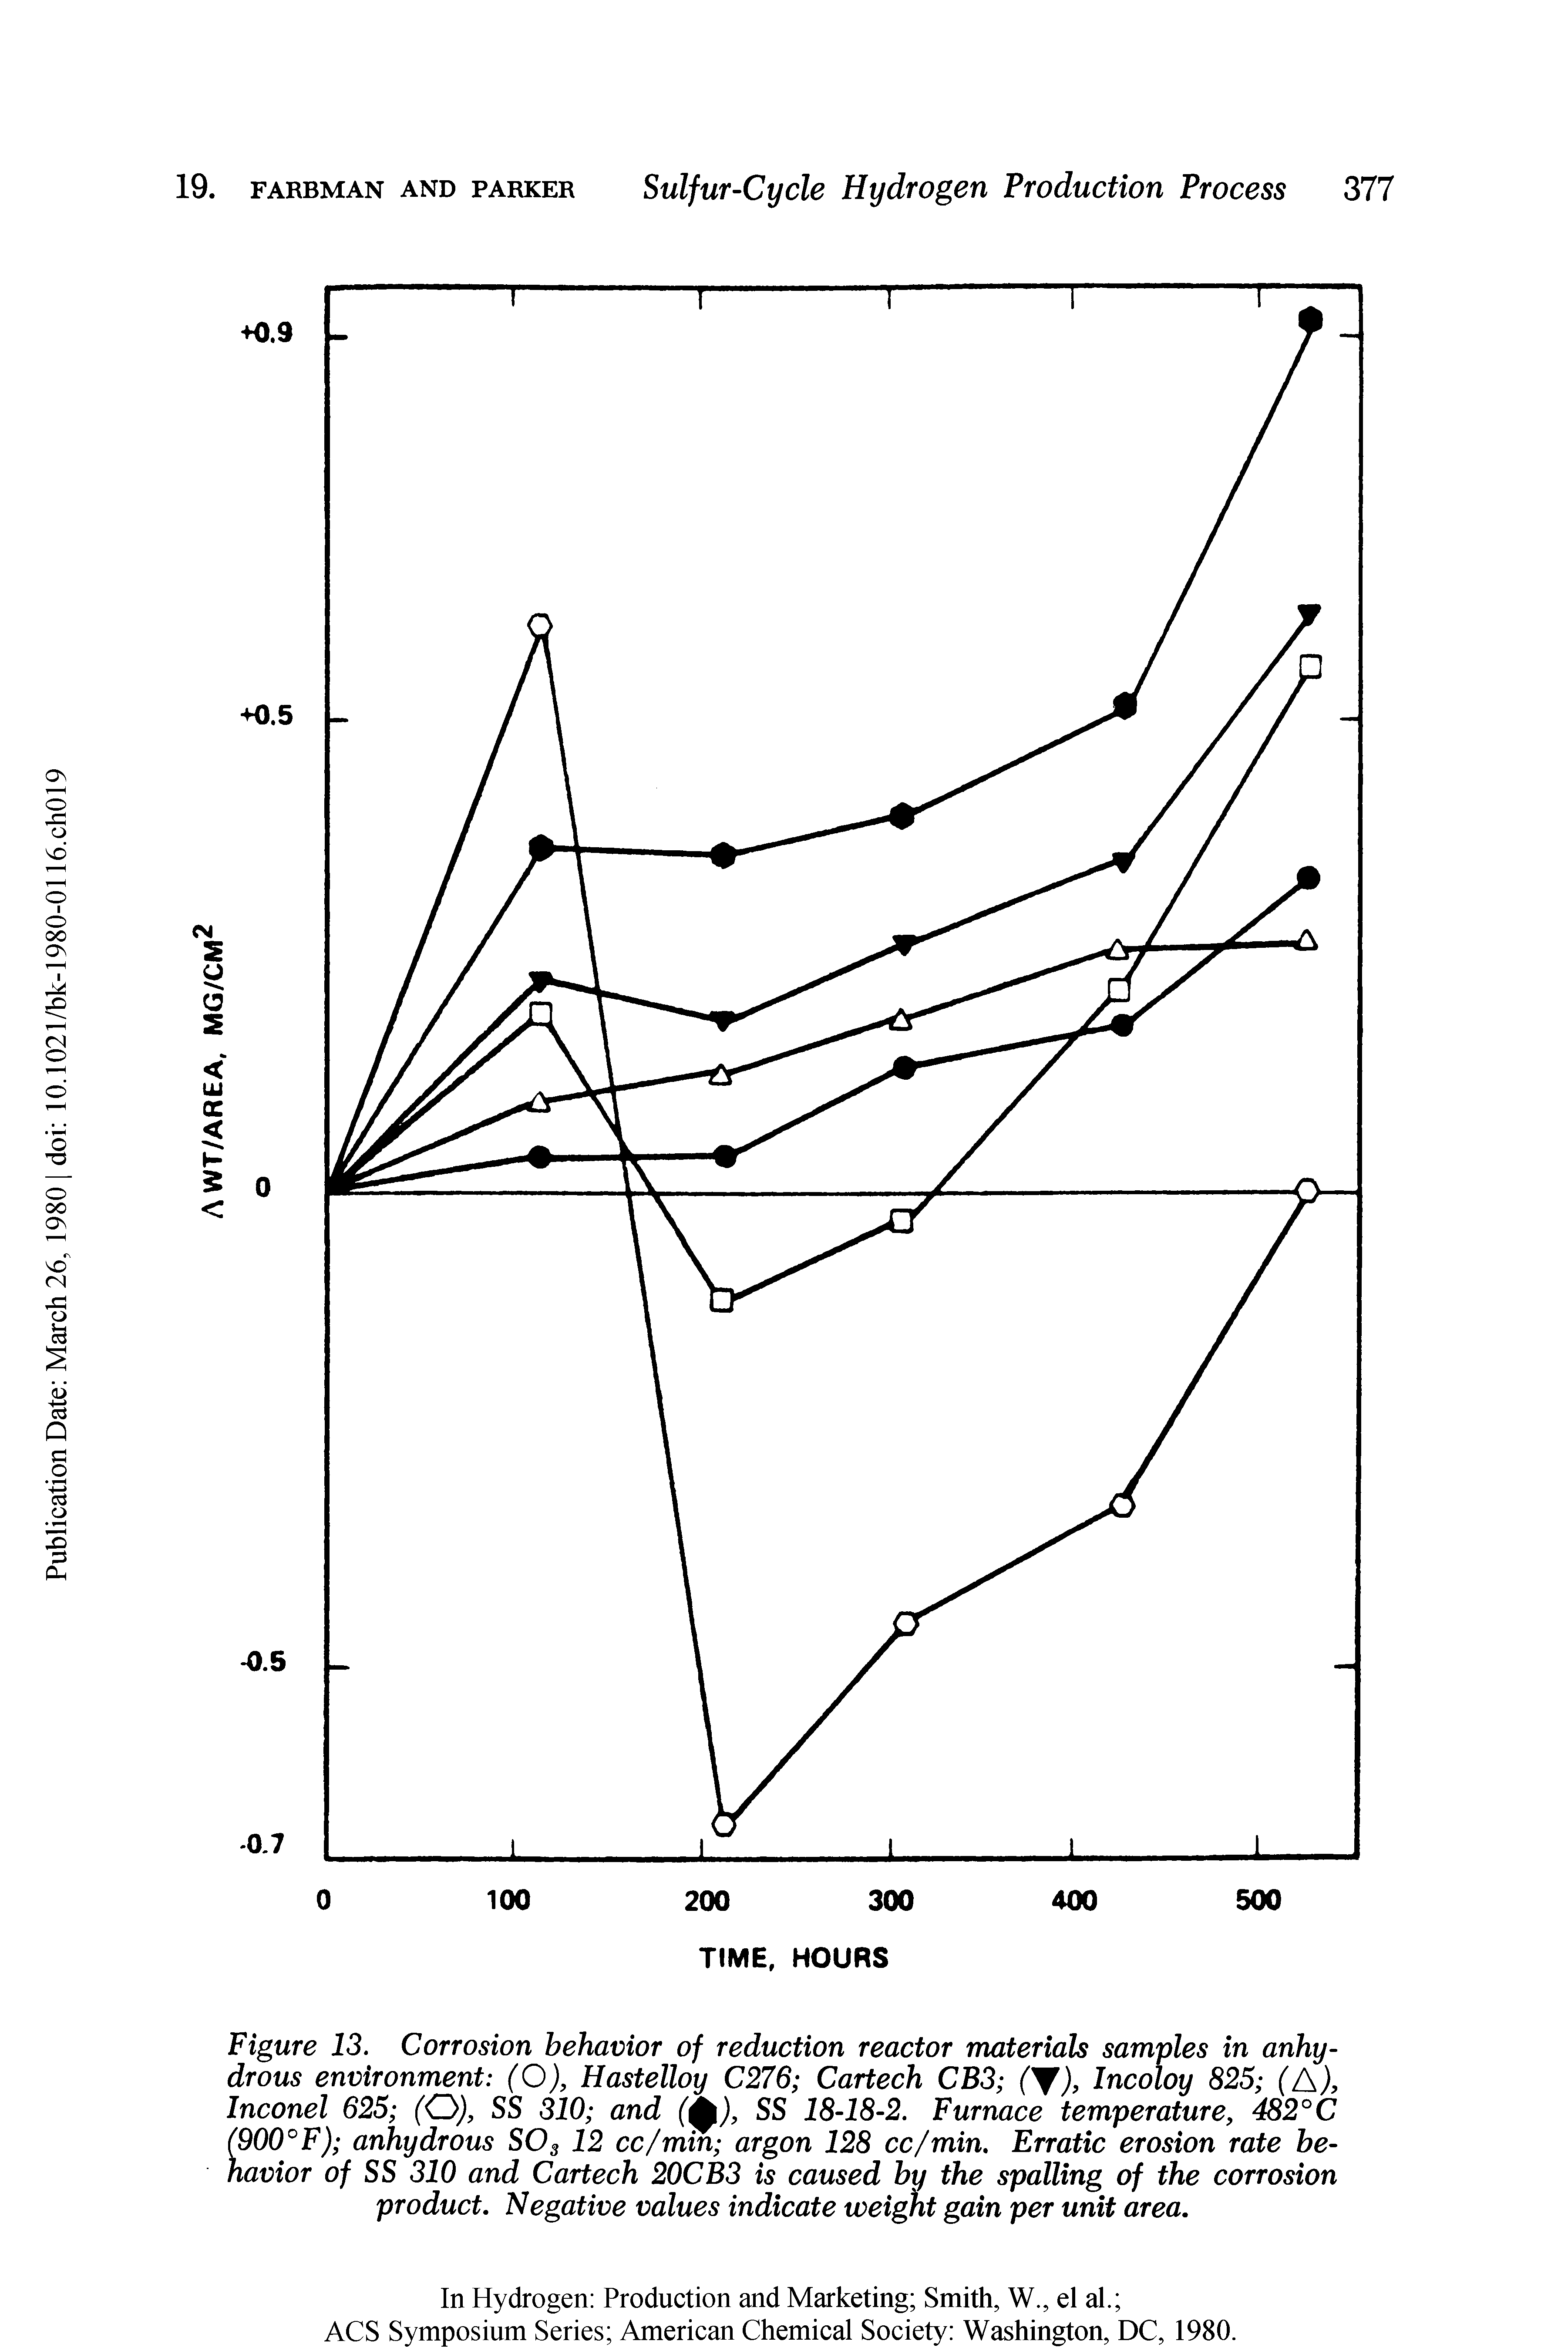 Figure 13. Corrosion behavior of reduction reactor materials samples in anhydrous environment (O), Hastelloy C276 Cartech CB3 (V), Incoloy 825 (A), Inconel 625 (O), SS 310 and (0), SS 18-18-2. Furnace temperature, 482°C (900°F) anhydrous S03 12 cc/min argon 128 cc/min. Erratic erosion rate behavior of SS 310 and Cartech 20CB3 is caused by the spalling of the corrosion product. Negative values indicate weight gain per unit area.